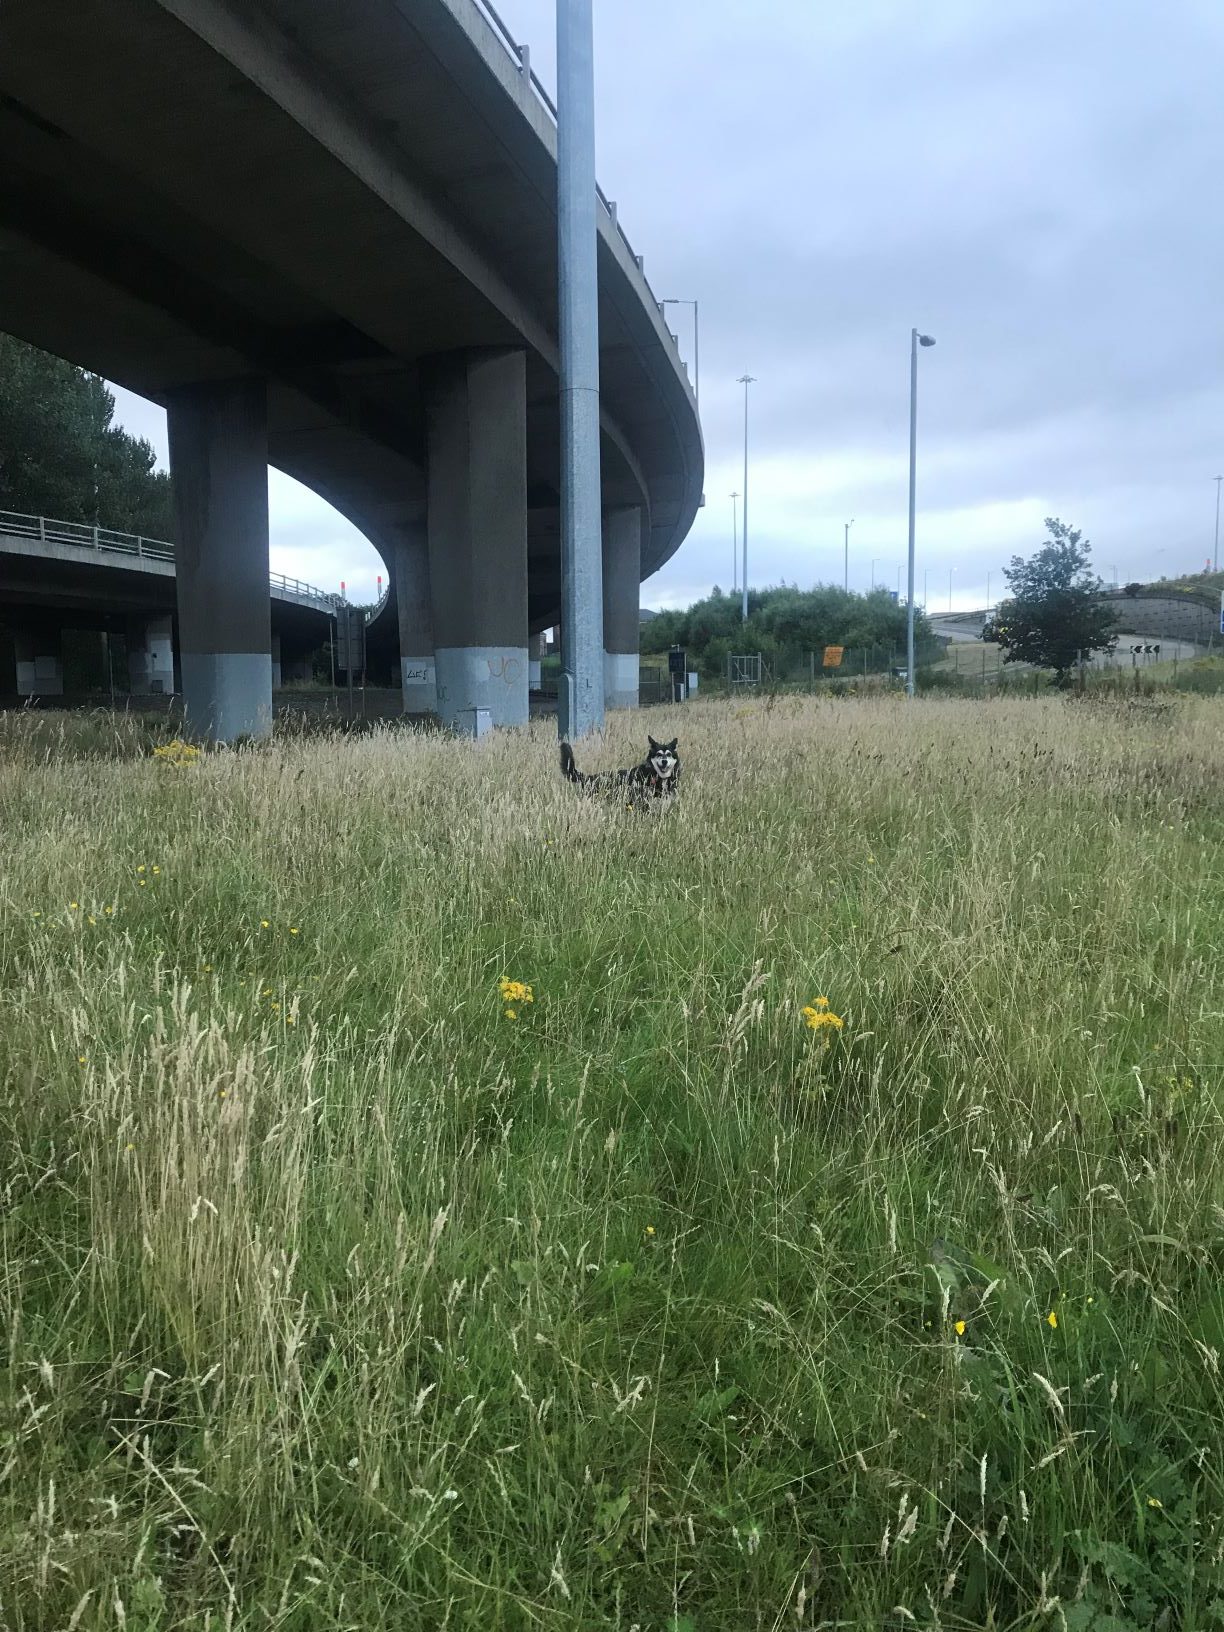 This image shows Raksha in a field near a highway overpass. The bottom half of the image is green and tan grass, with a few golden flowers, and Raksha. She is a mid-sized mix of German Shepard and Husky. You can see her black fur and tail, her pointy black ears, her white cheeks and eyebrows, and her black eyes and nose. She is waiting for me to throw a pebble for her to chase. Above and behind her is the highway overpass, with a few very tall street lights near it. Some trees are visible in the background. 